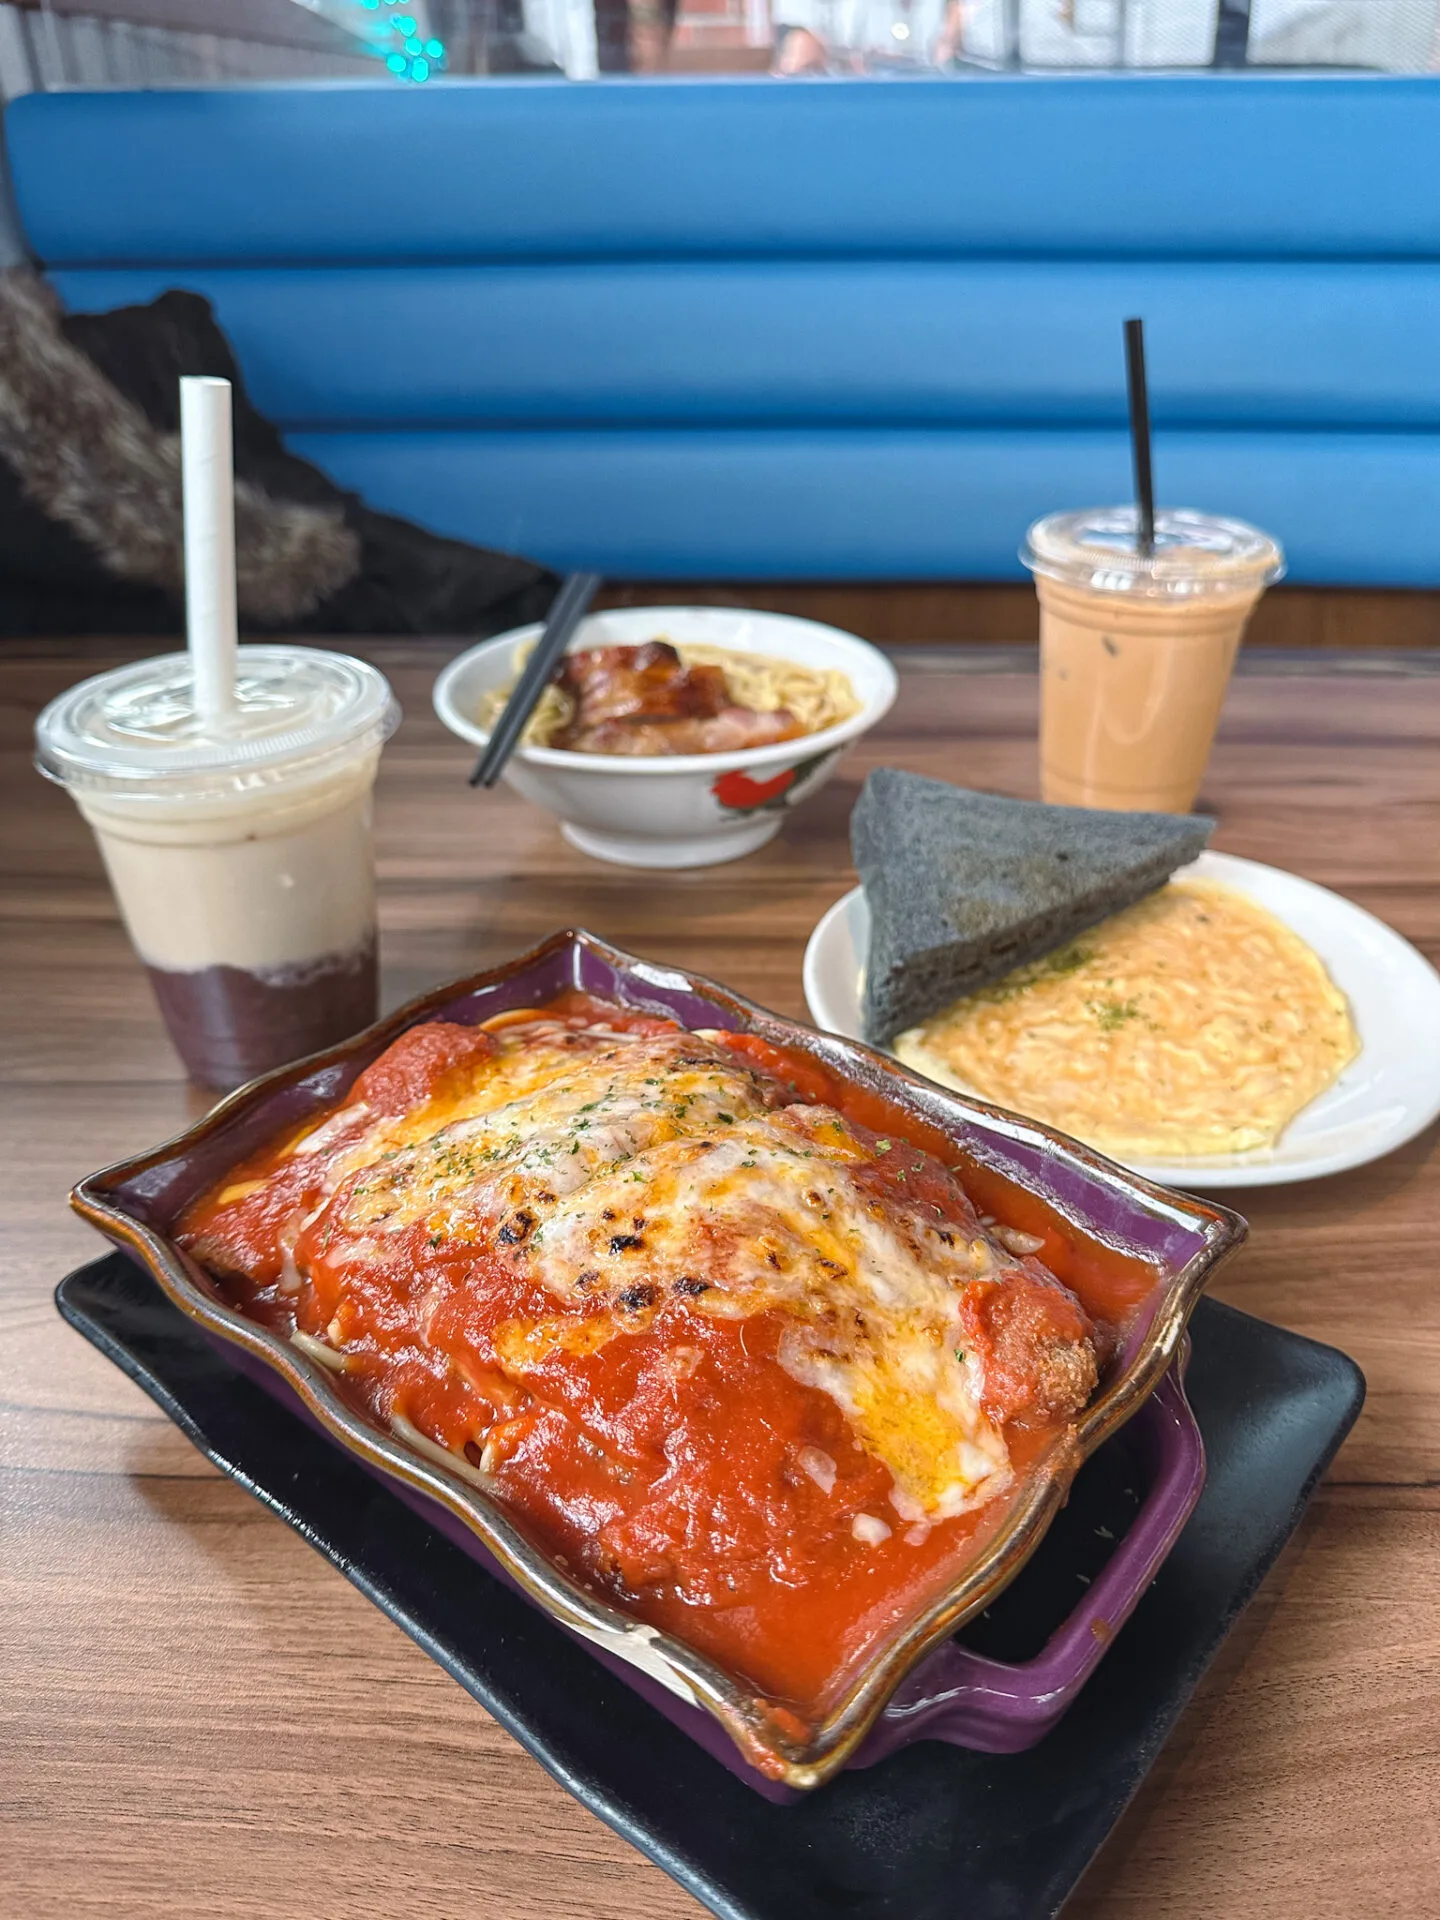 Tomato Cutlet Pork Chop Double Cheese Baked Spaghetti from Good Catch Bar & Café in Markham, Ontario